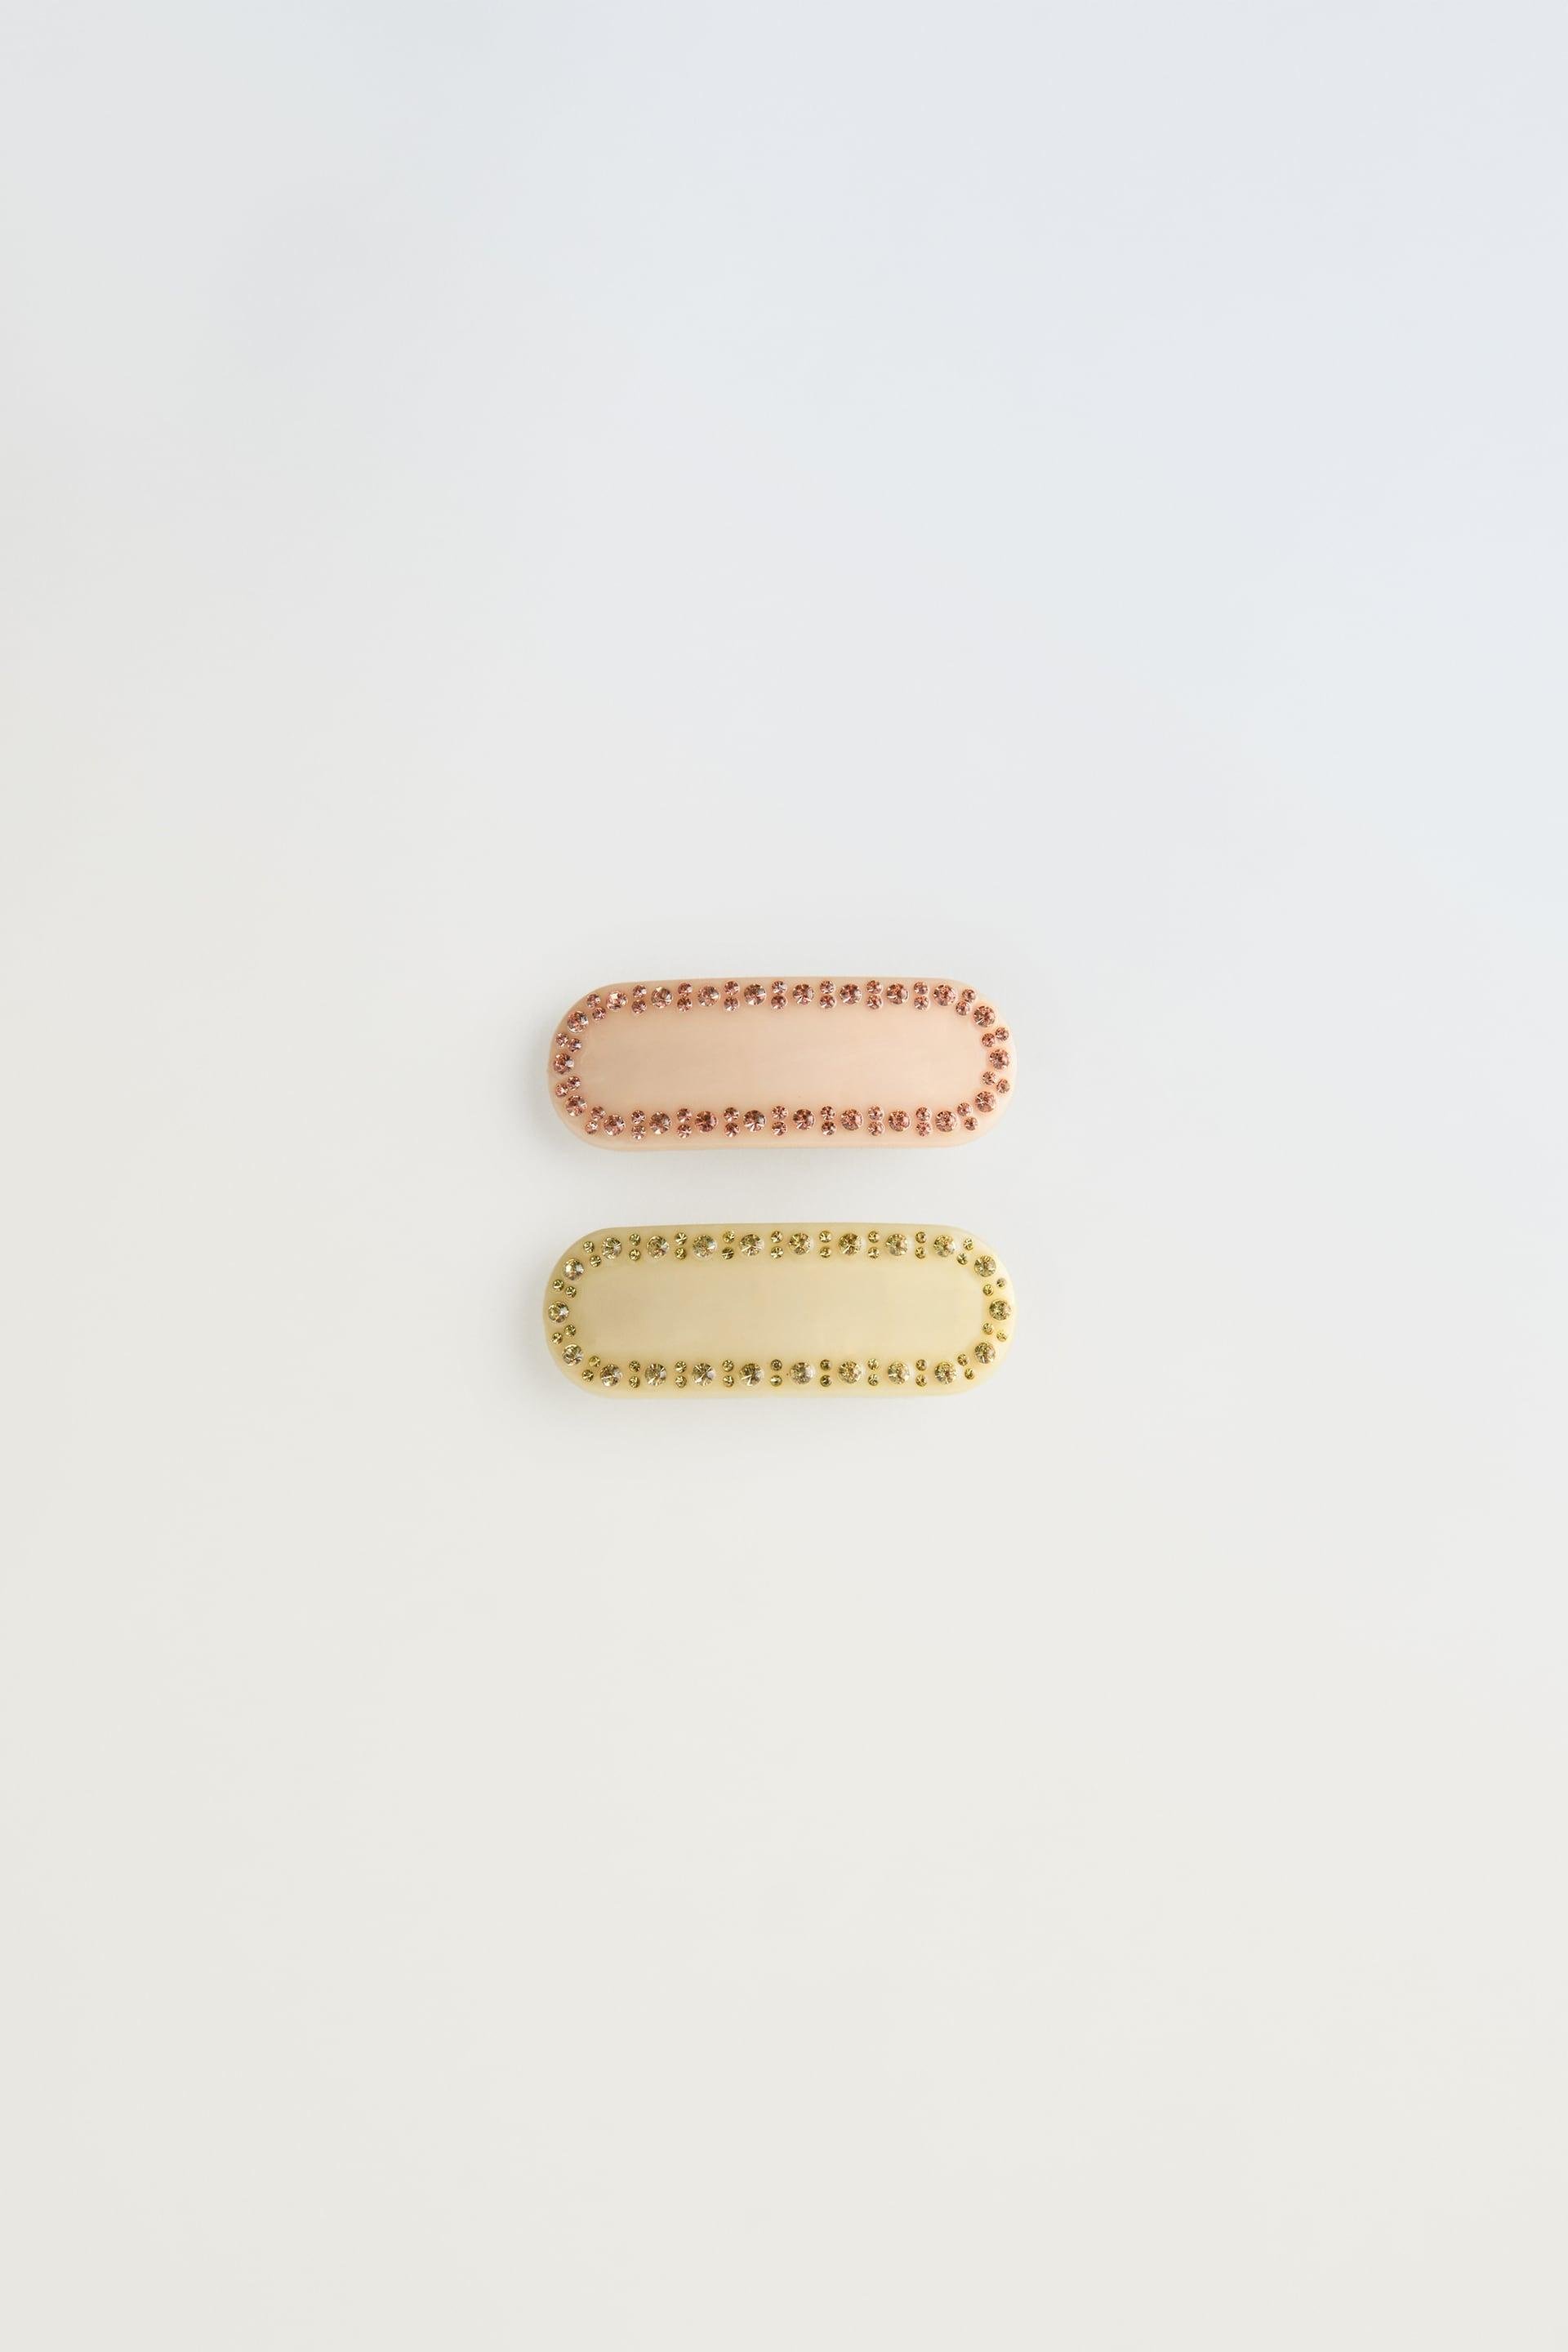 TWO-PACK OF PEARLY RHINESTONE HAIR CLIPS by ZARA